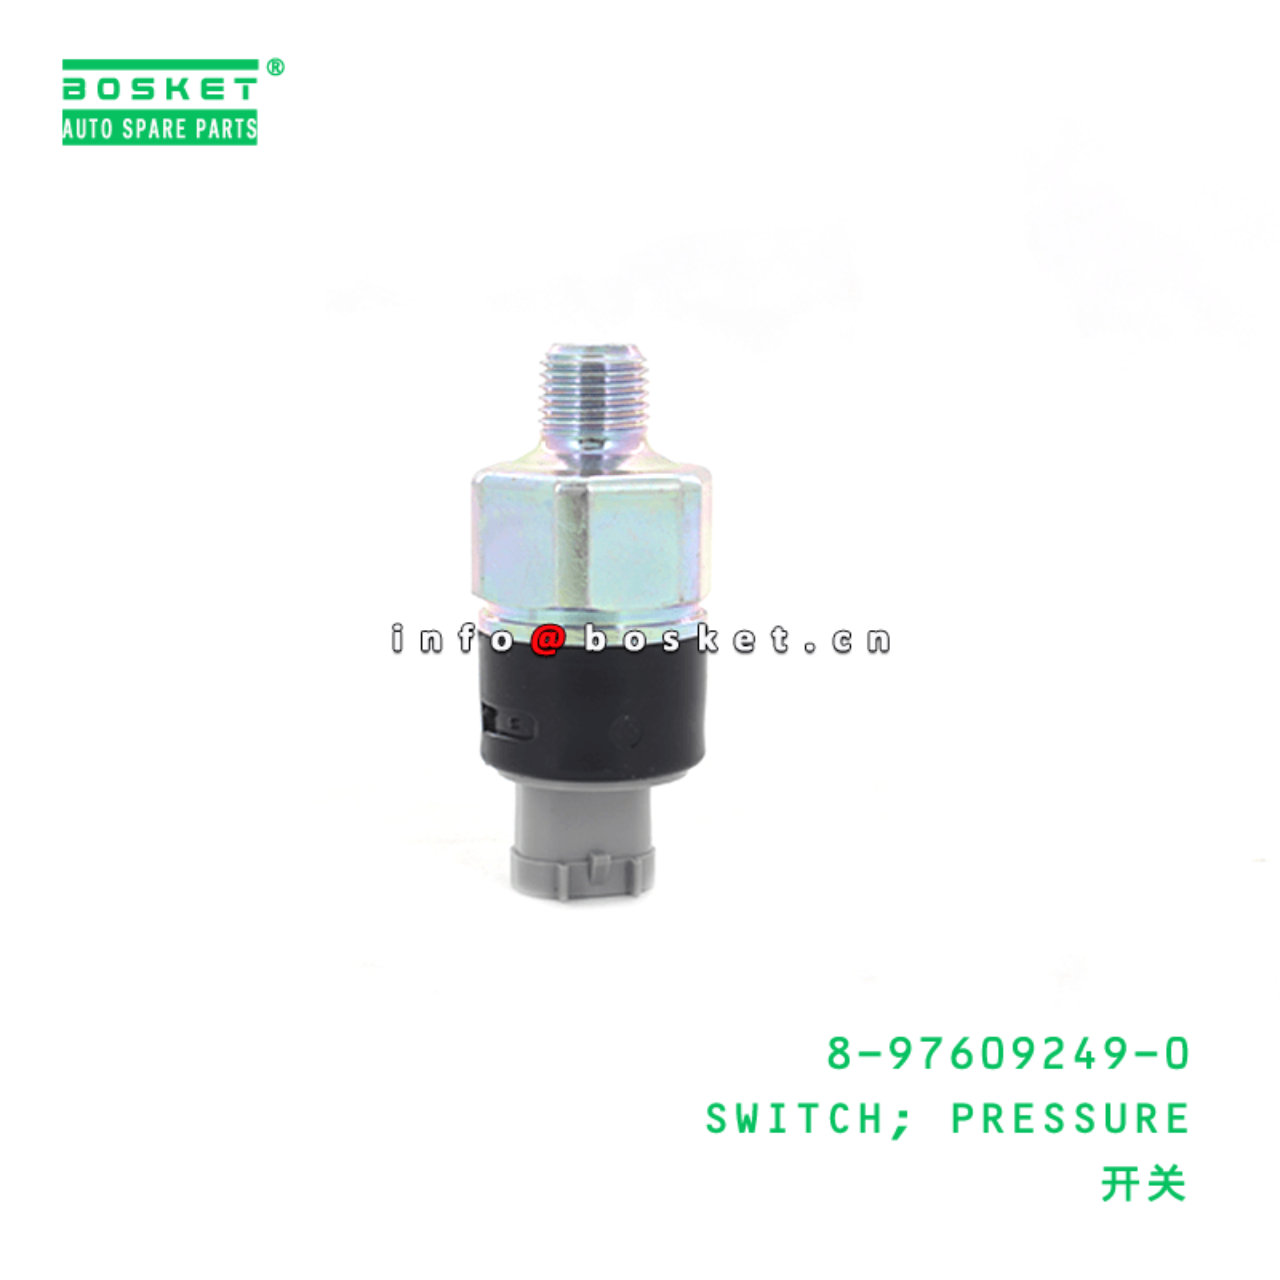 8-97609249-0 Pressure Switch 8976092490 Suitable for ISUZU VC46 